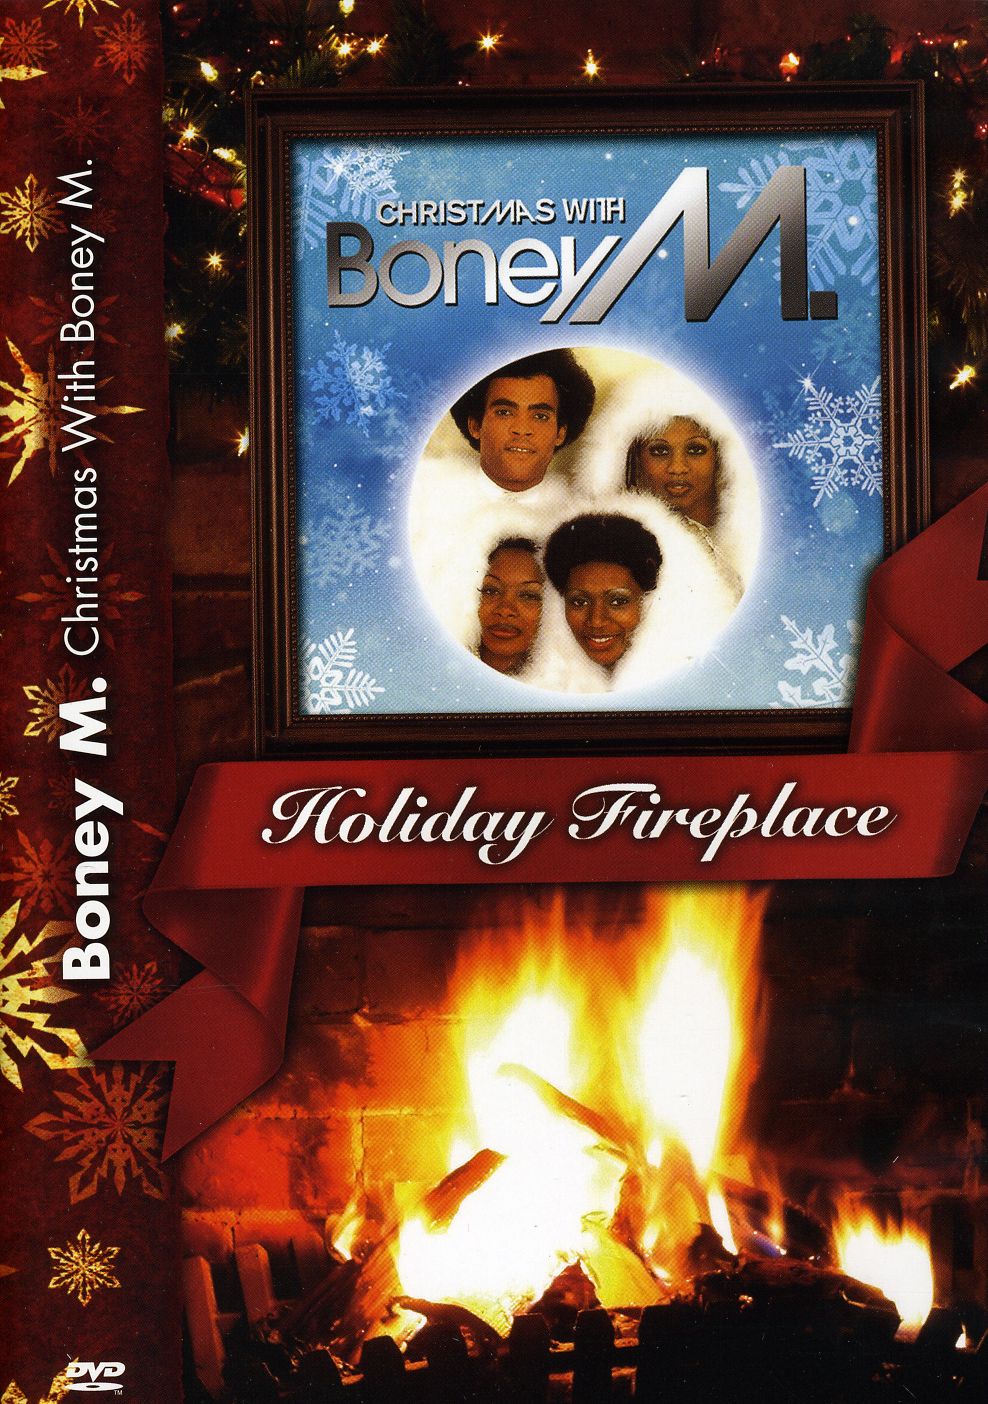 CHRISTMAS WITH BONEY M.-HOLIDAY FIREPLACE / (CAN)